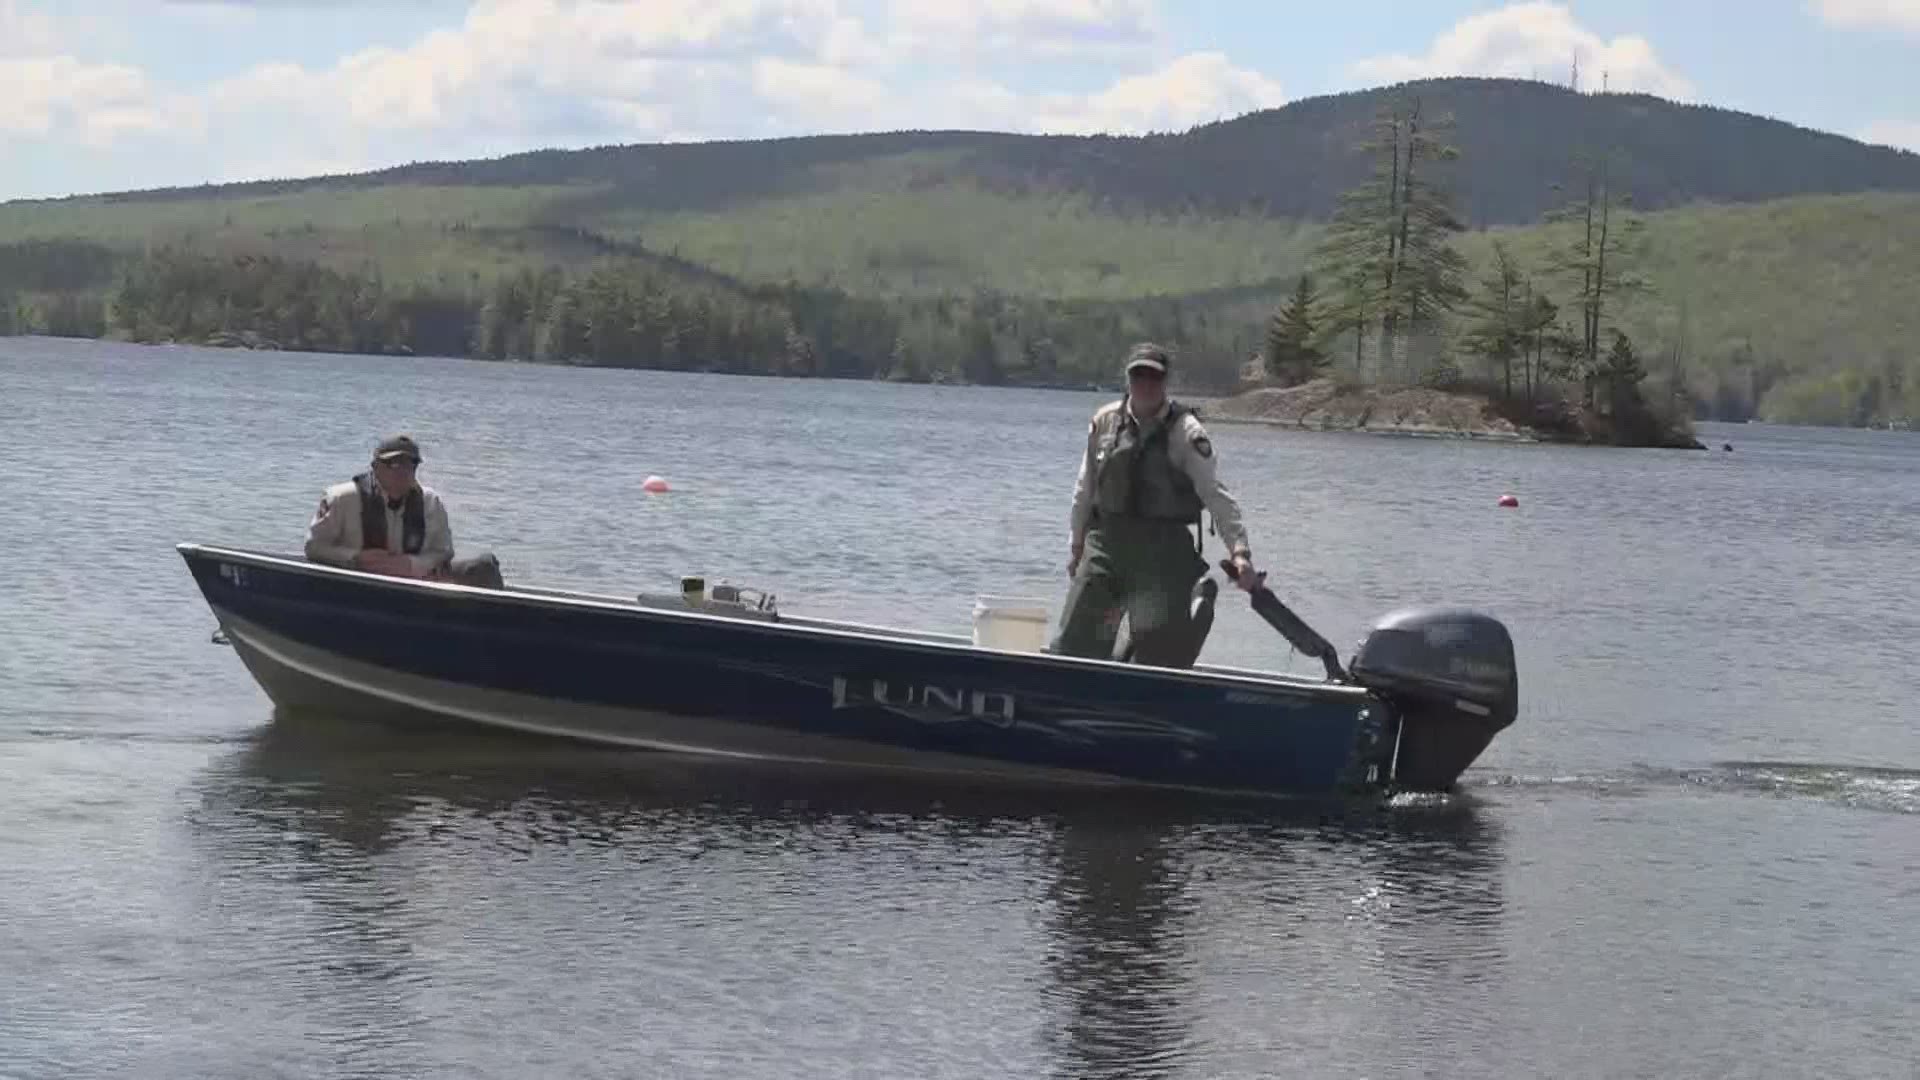 Fish stocking in Maine's lakes and ponds at full throttle for anglers